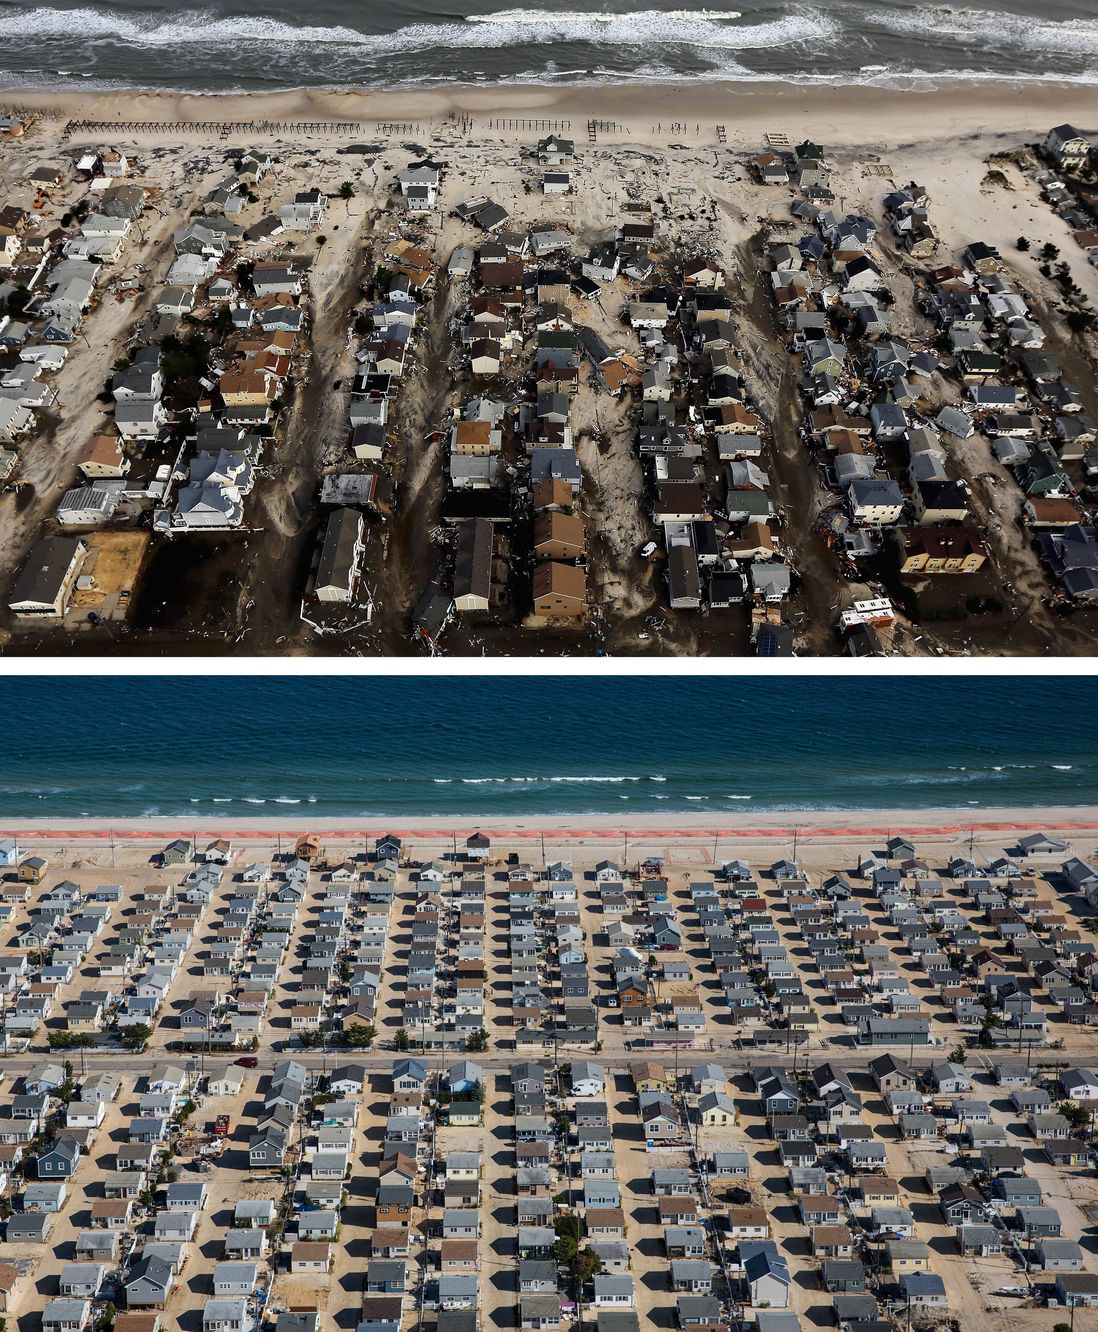 [Top] Homes are shown surrounded by sand and debris in Seaside Heights, New Jersey October 31, 2012. [Bottom] Homes are shown in Seaside Heights, New Jersey are shown October 21, 2013.